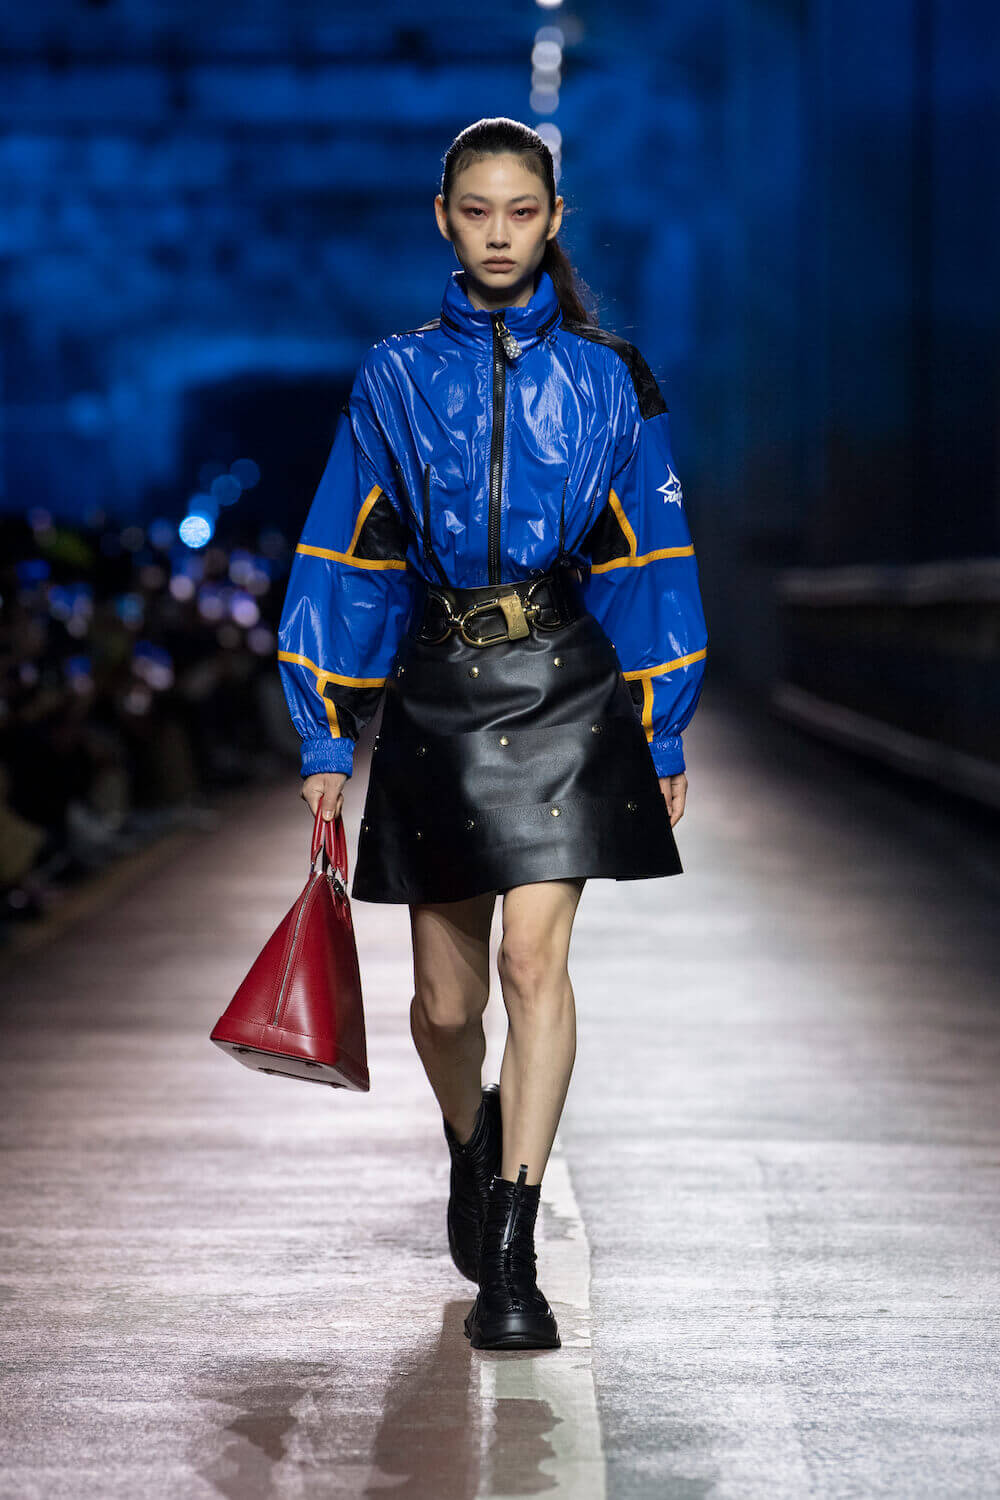 Louis Vuitton at London: the latest Nicolas Ghesquiere inspirations